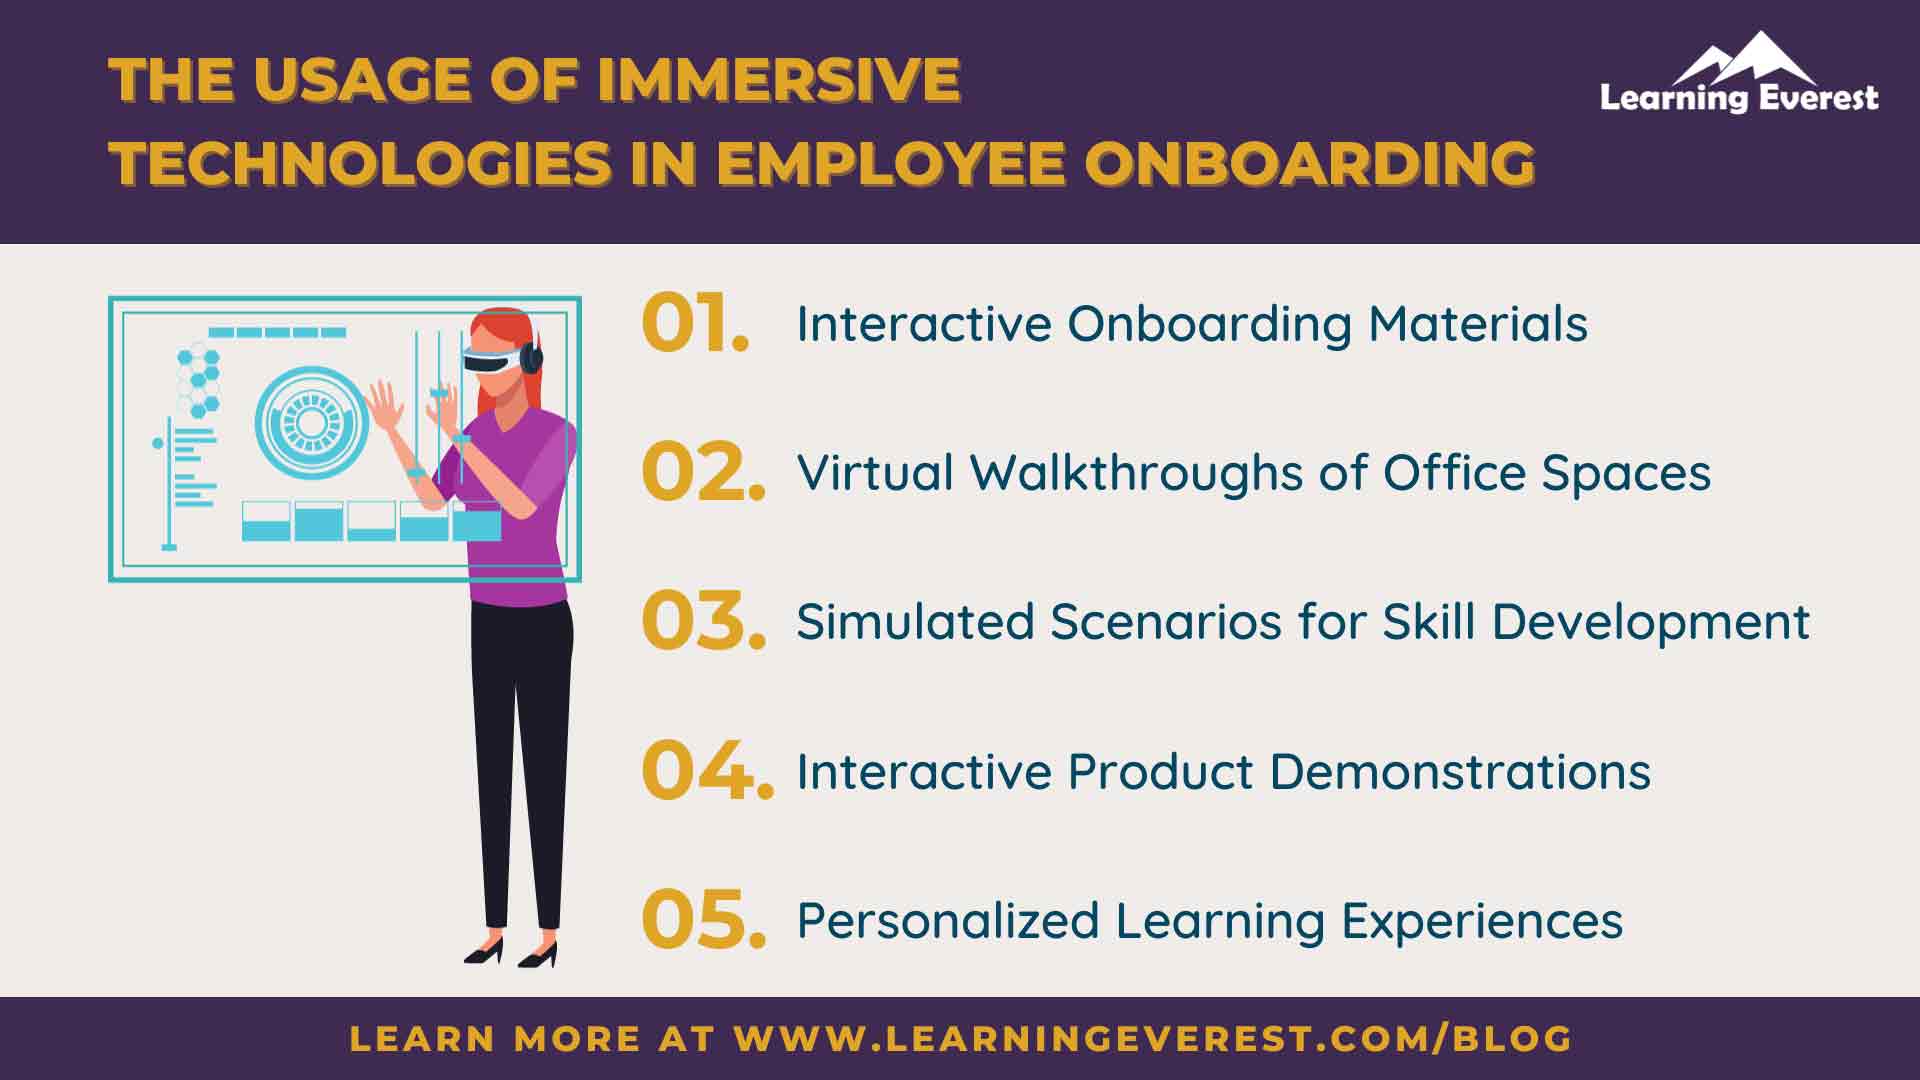 The Usage of Immersive Technologies in Employee Onboarding